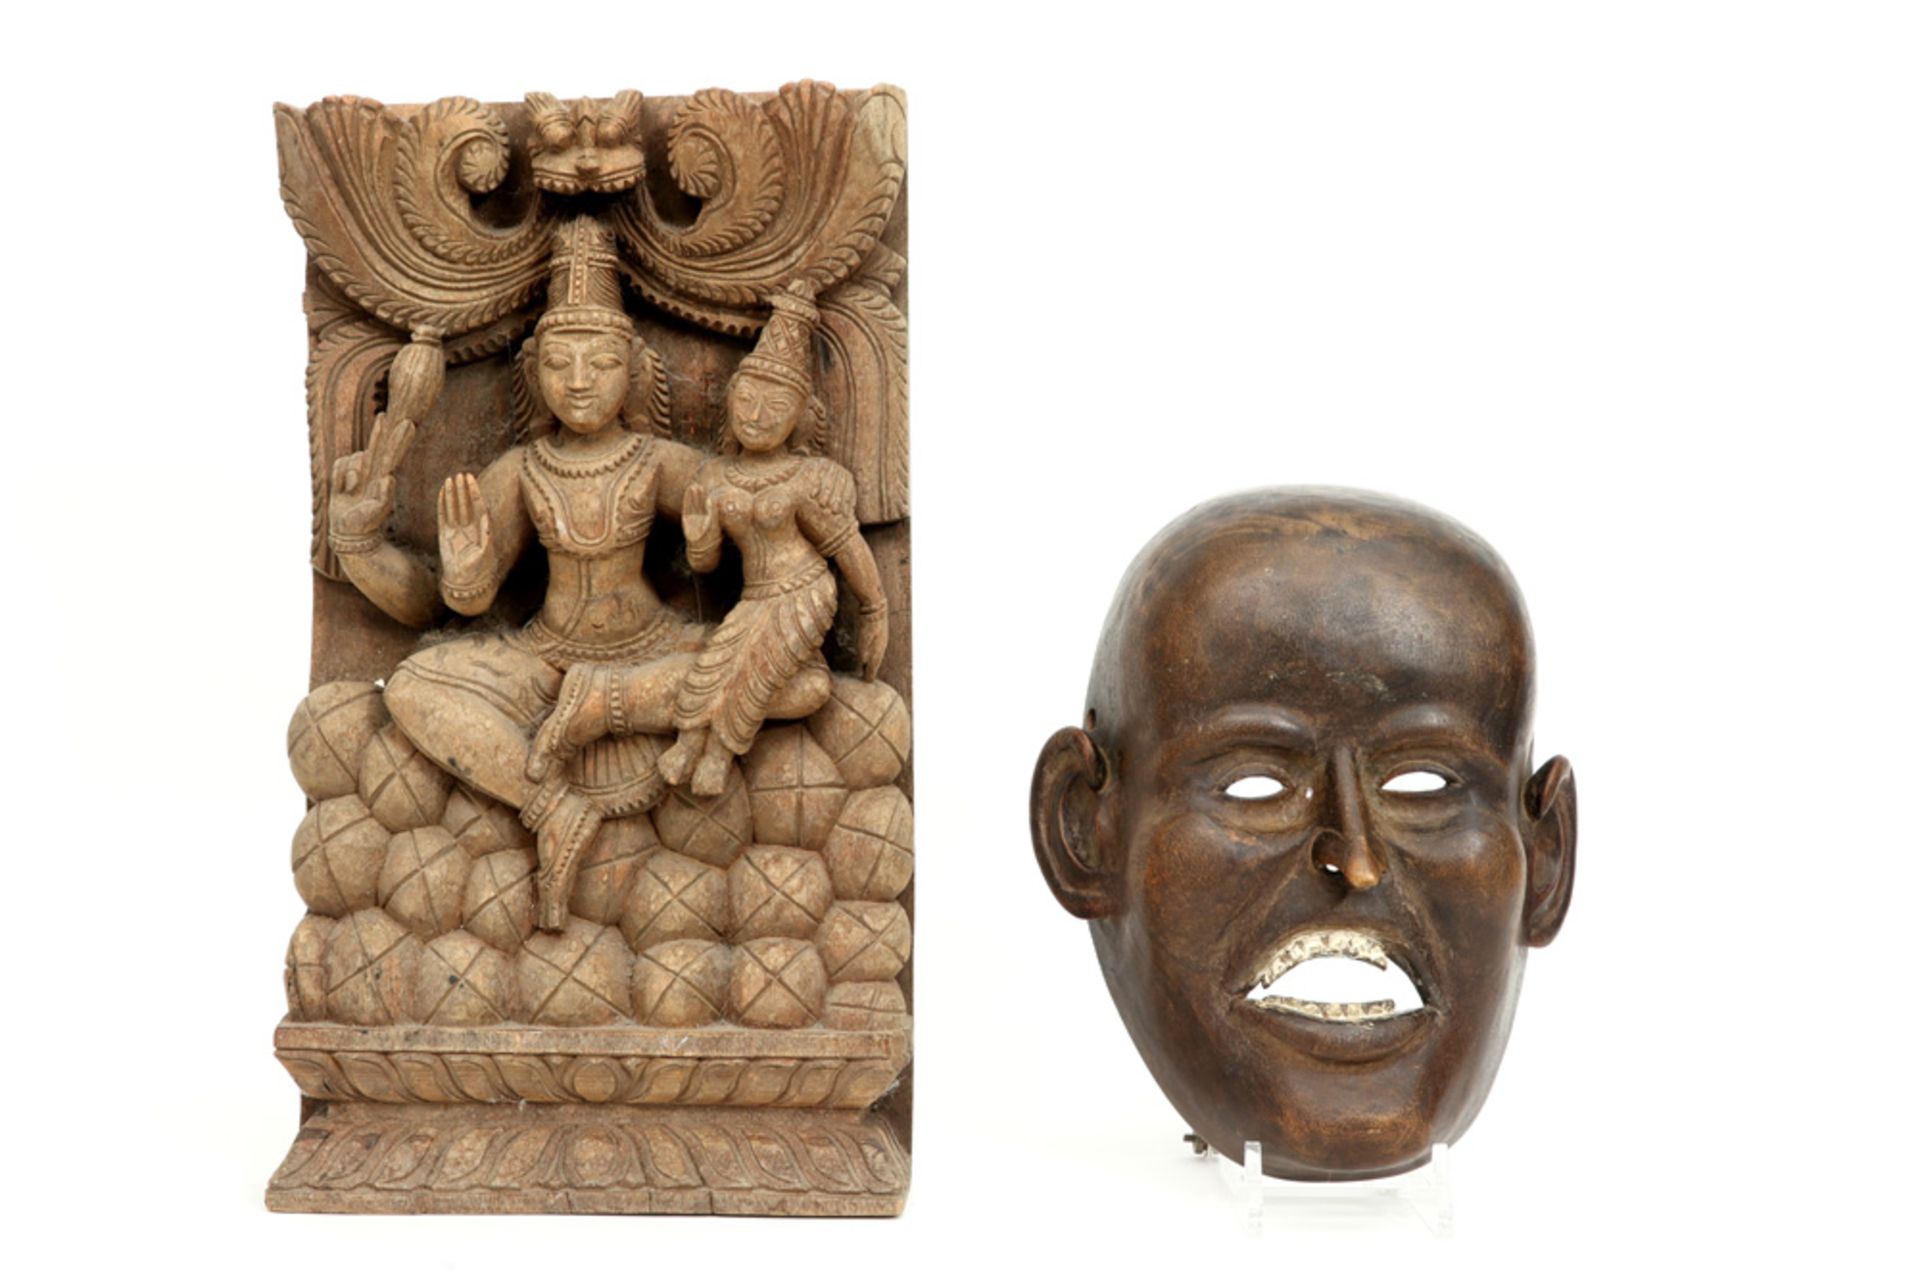 Japanese mask and Indian sculpture in wood